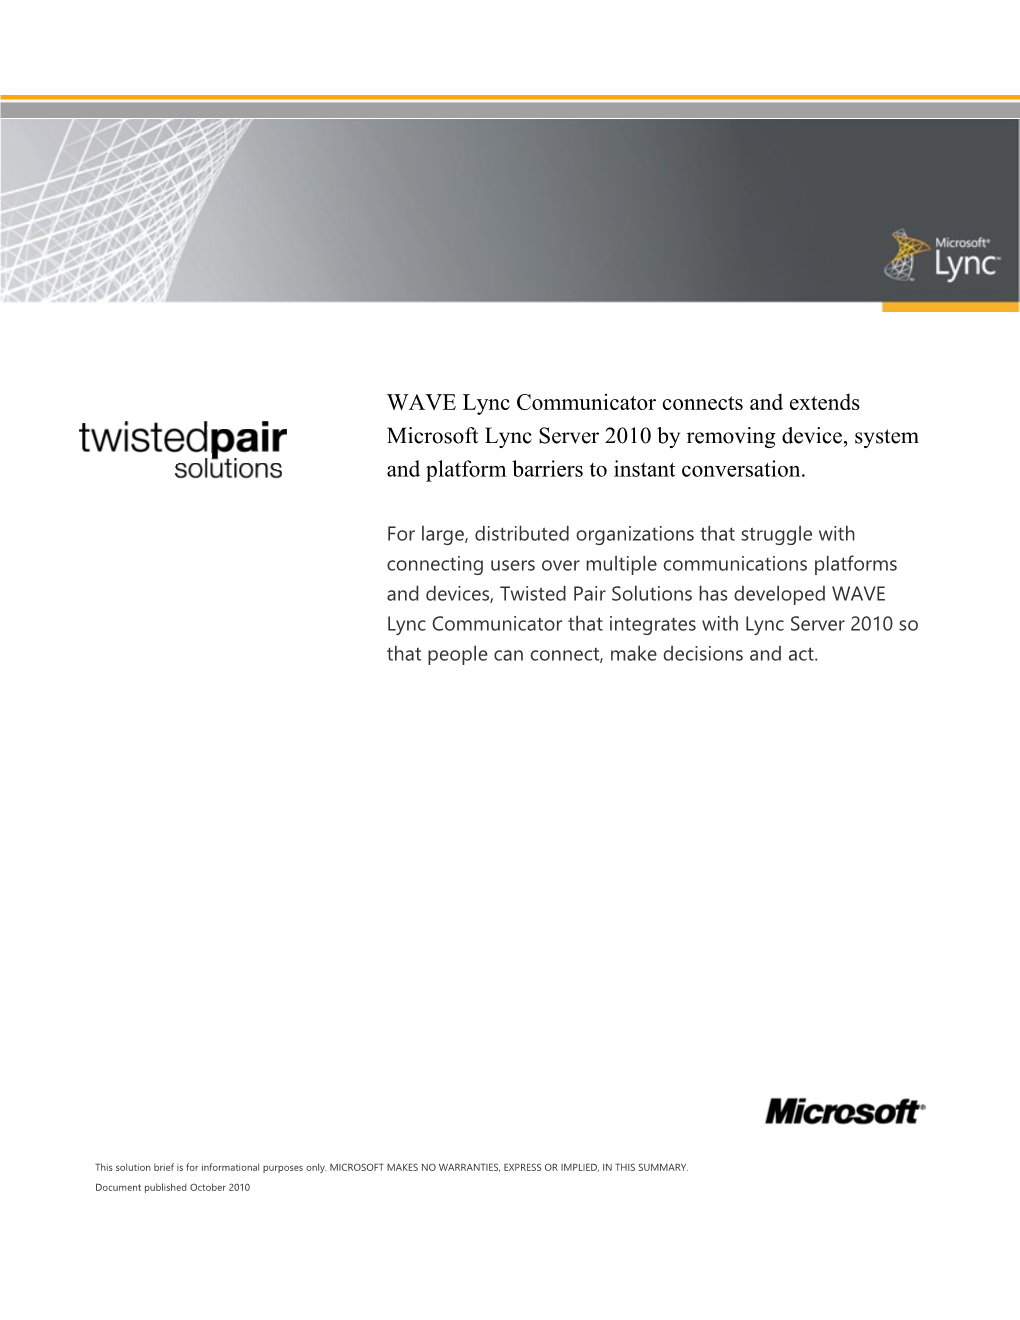 WAVE Lync Communicator Connects and Extends Microsoft Lync Server 2010 by Removing Device